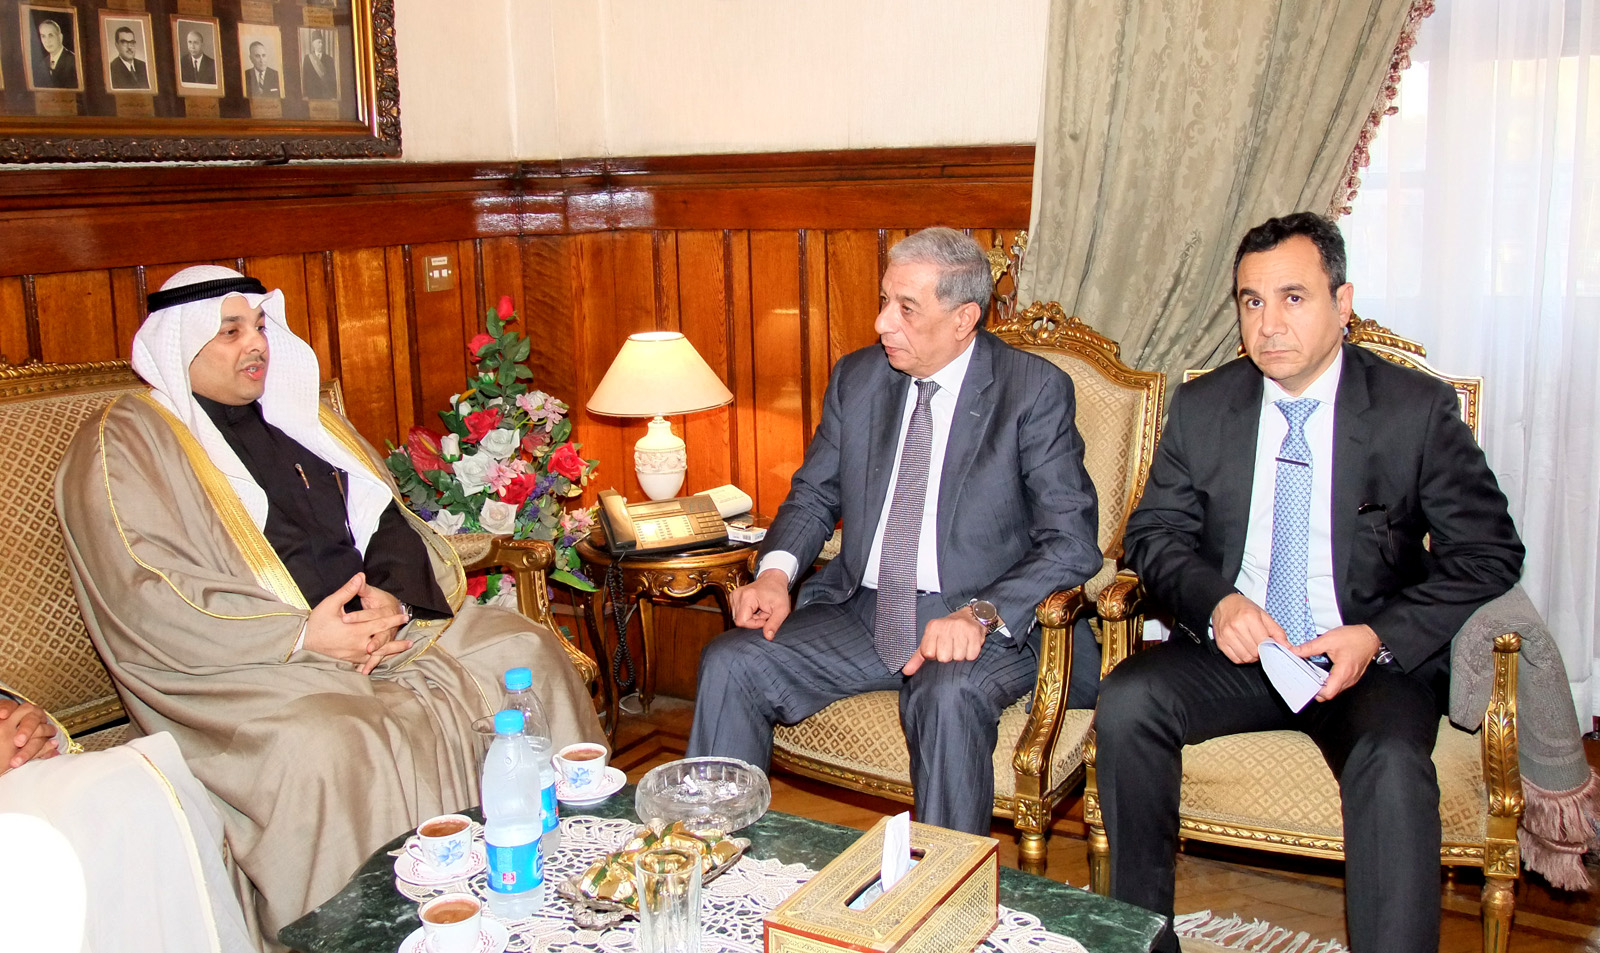 Kuwait's Minister of Justice and Minister of Awqaf and Islamic Affairs Yaqoub Al-San'e during his meeting with Egyptian Public Prosecutor Hesham Barakat